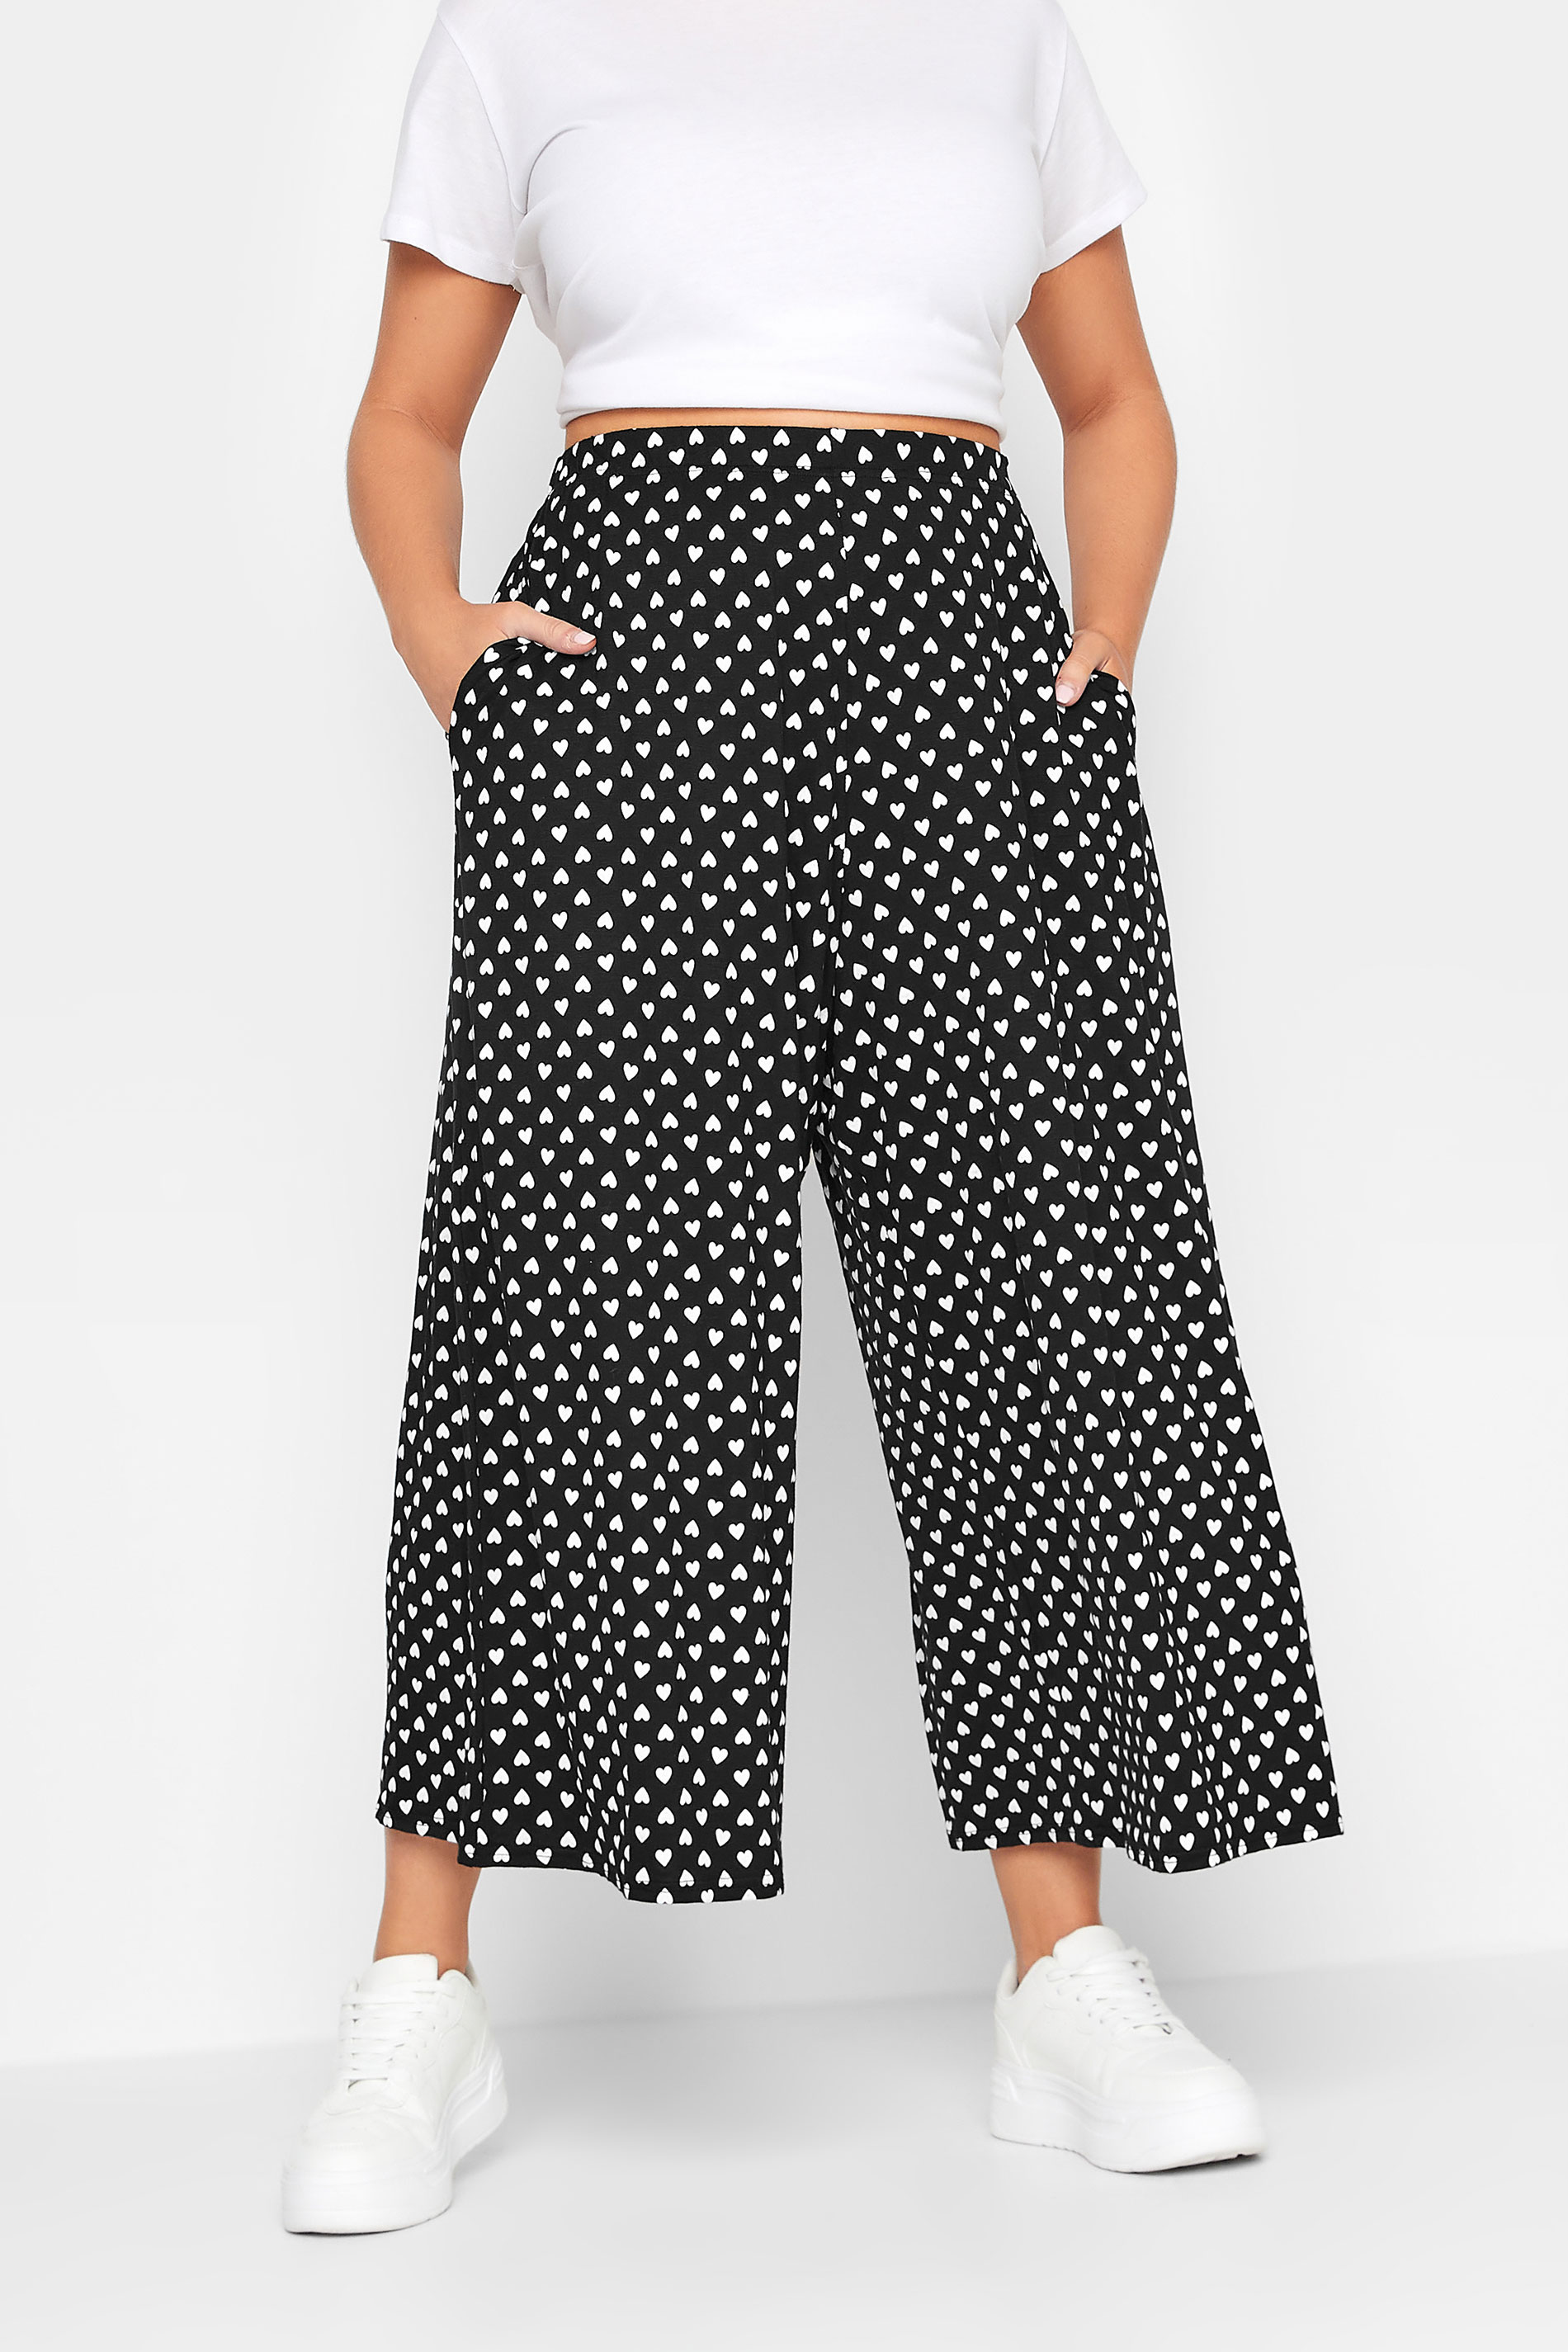 LIMITED COLLECTION Plus Size Black Extra Wide Leg Culottes | Yours Clothing  2